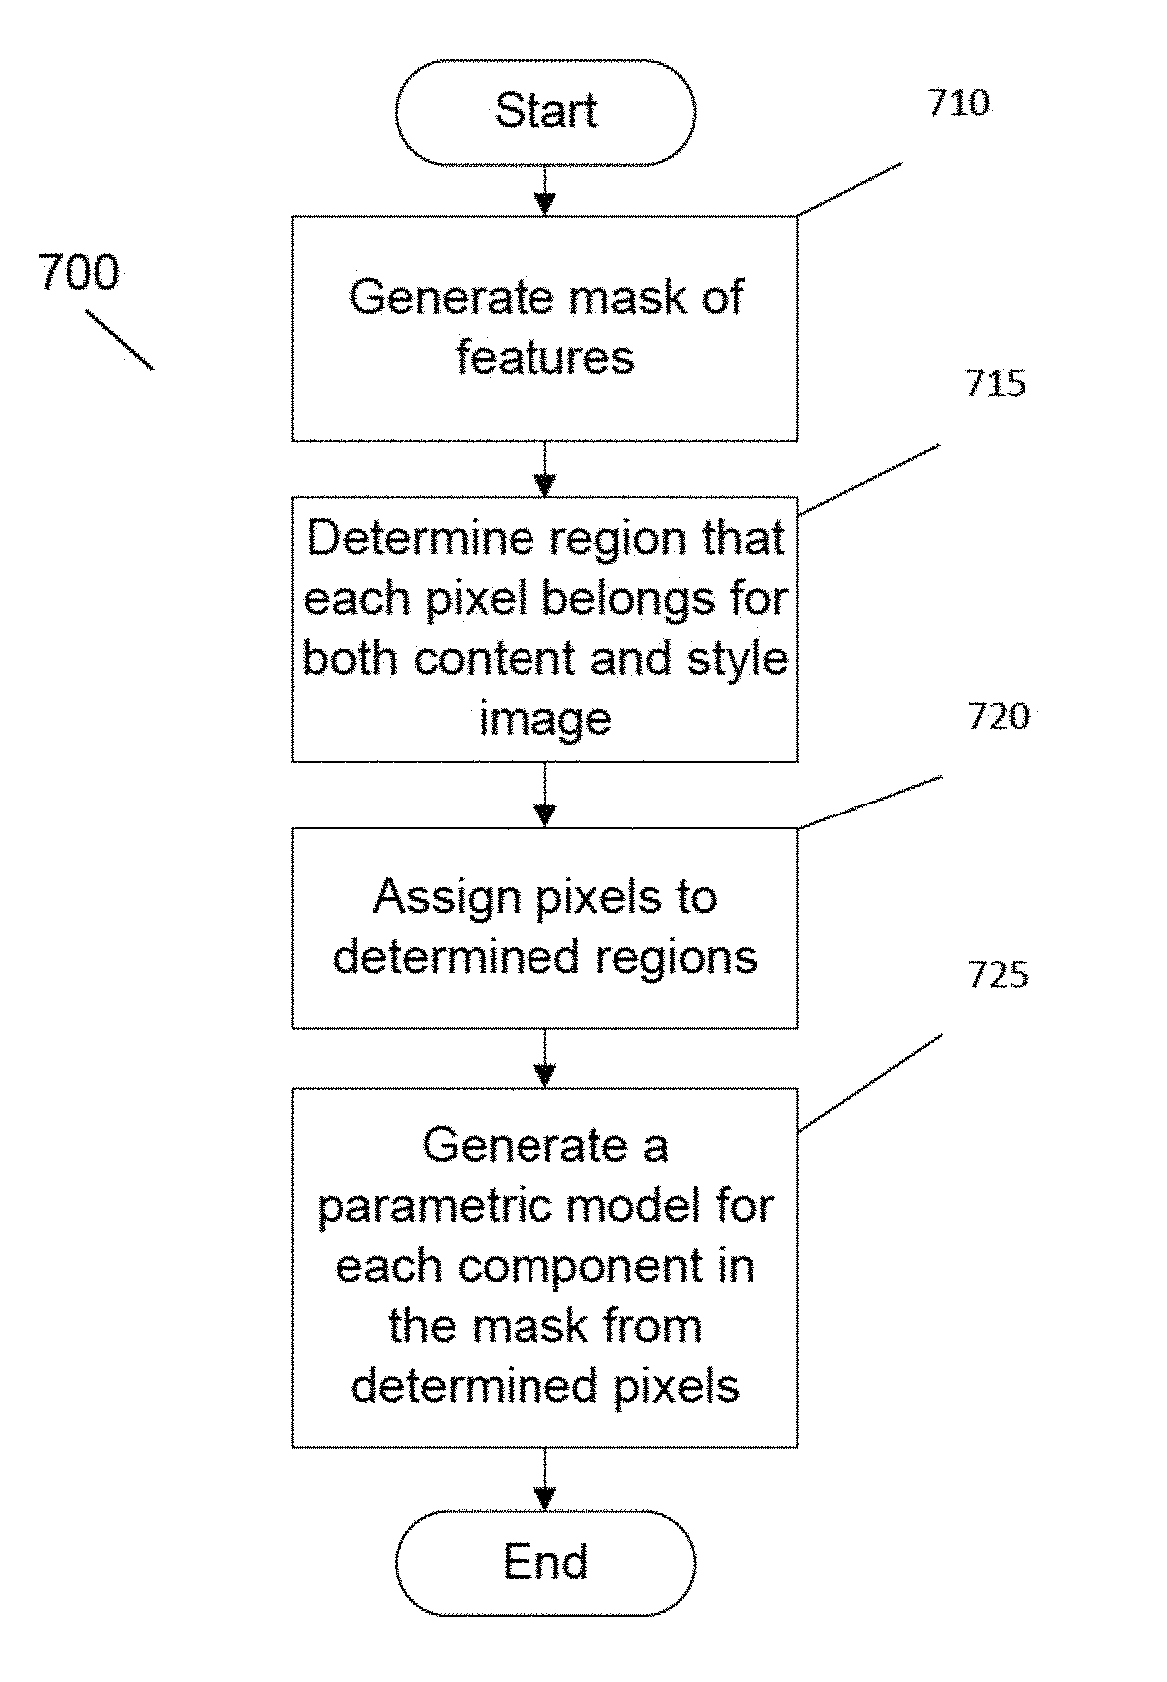 Systems and methods for providing convolutional neural network based image synthesis using stable and controllable parametric models, a multiscale synthesis framework and novel network architectures